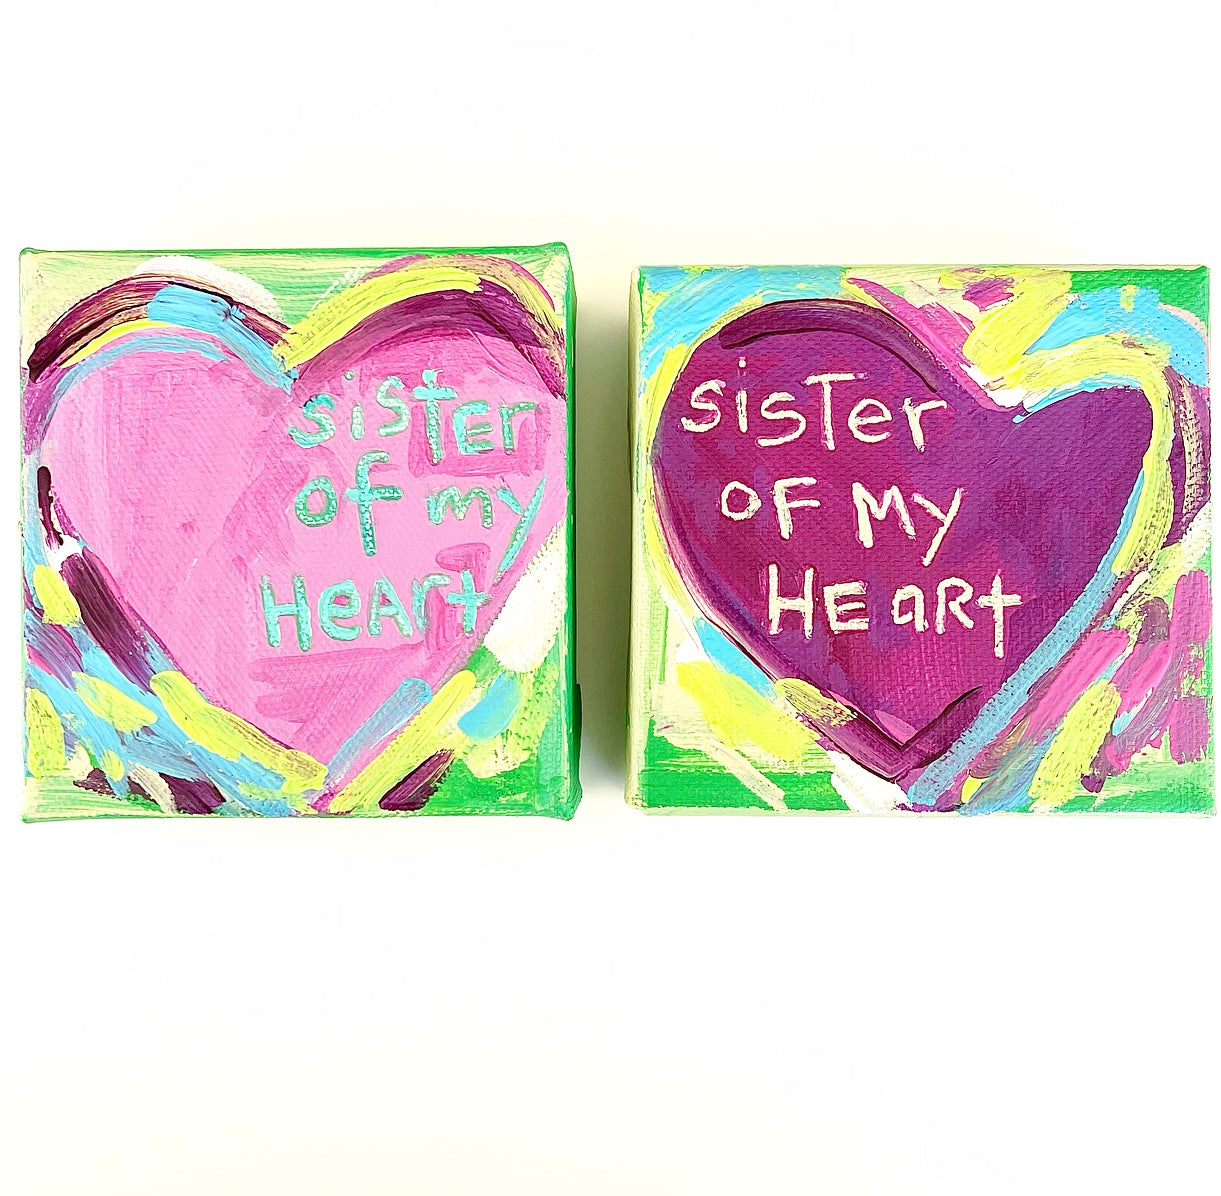 3rd Day of Christmas SISTERHOOD / FRIENDSHIP SET A - 4” x 4” One for You & One for Her